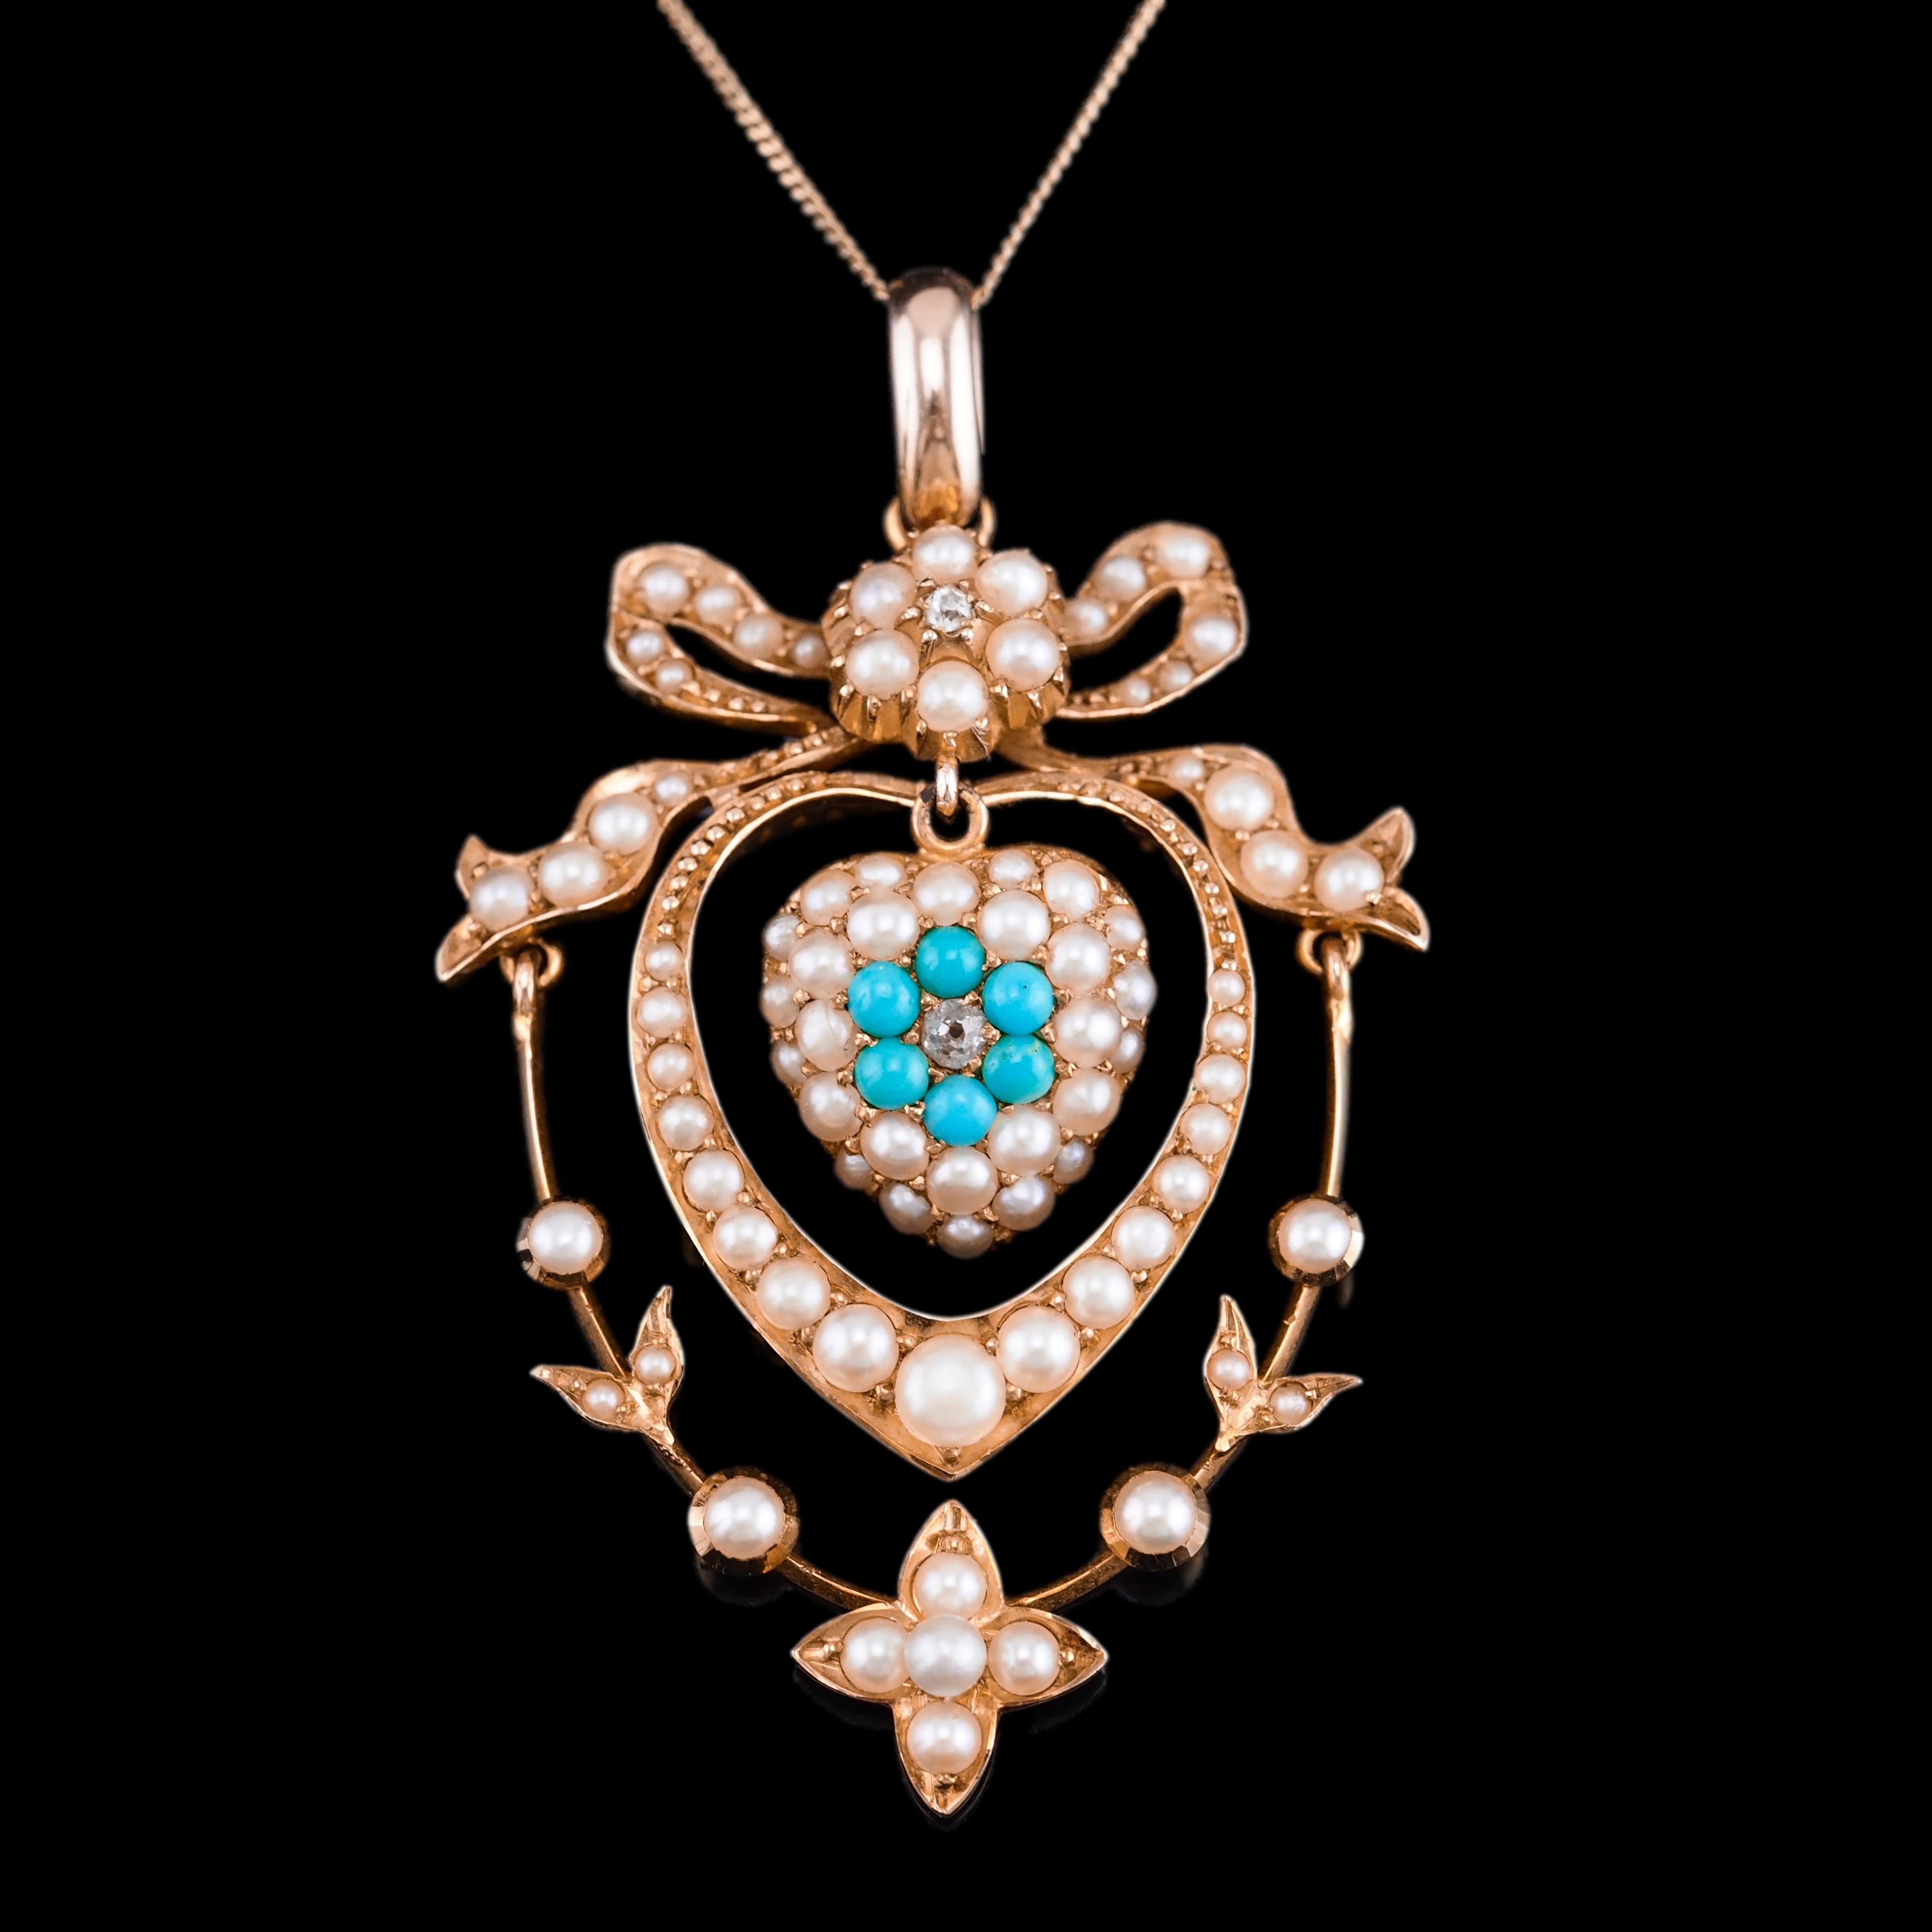 Antique Edwardian 15K Gold Turquoise Diamond & Seed Pearl Pendant Necklace c1910 In Good Condition For Sale In London, GB